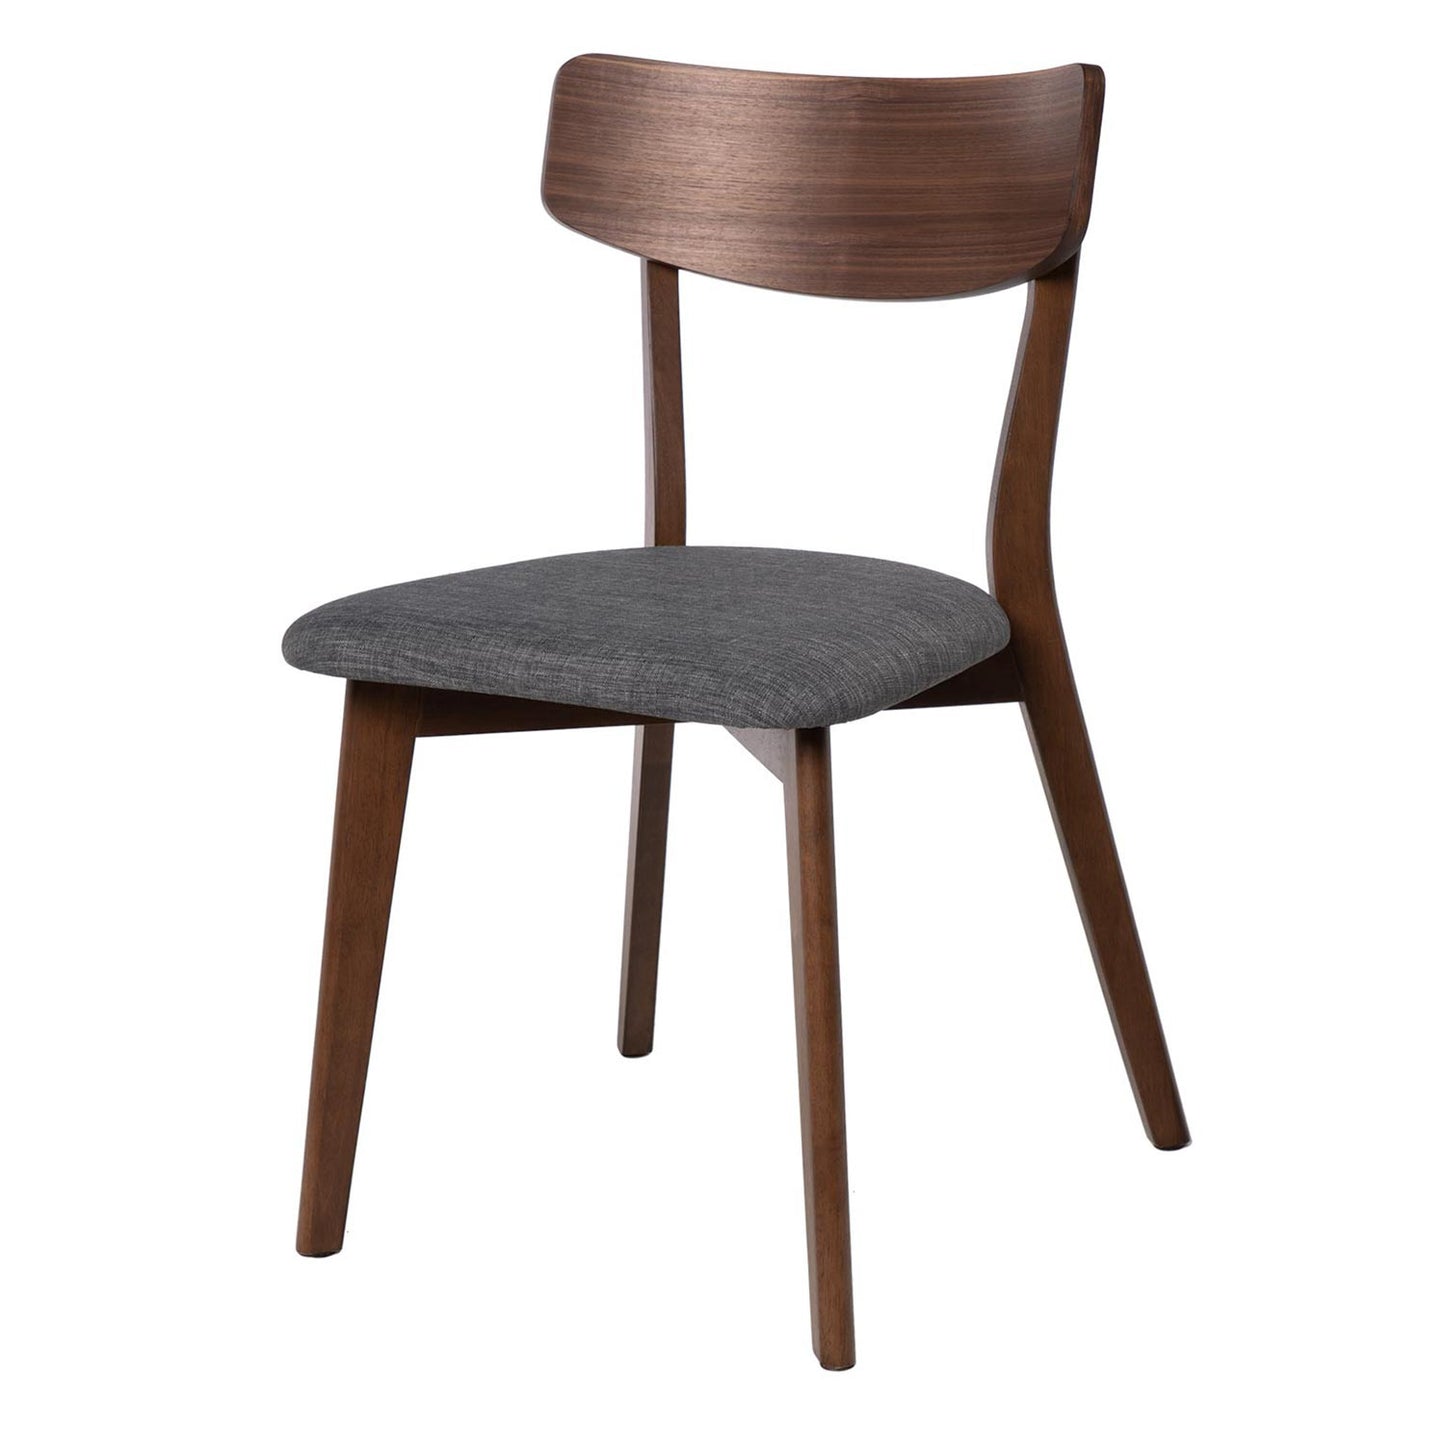 Keira dining chair